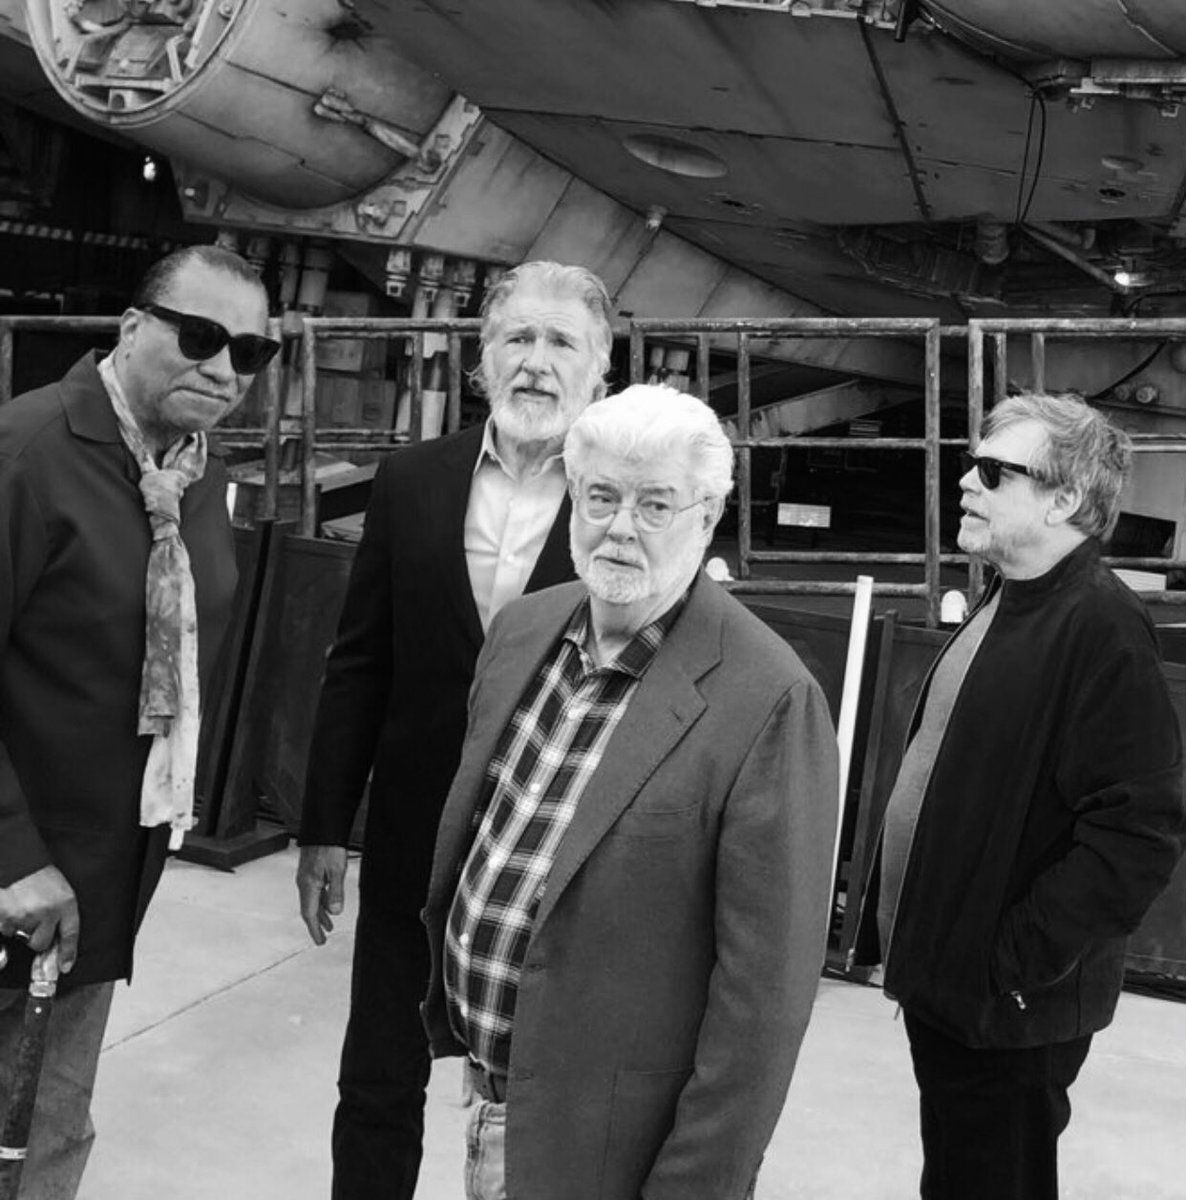 George Lucas, Ford, Billy Dee and Hamill look like they're dropping a new Blues album